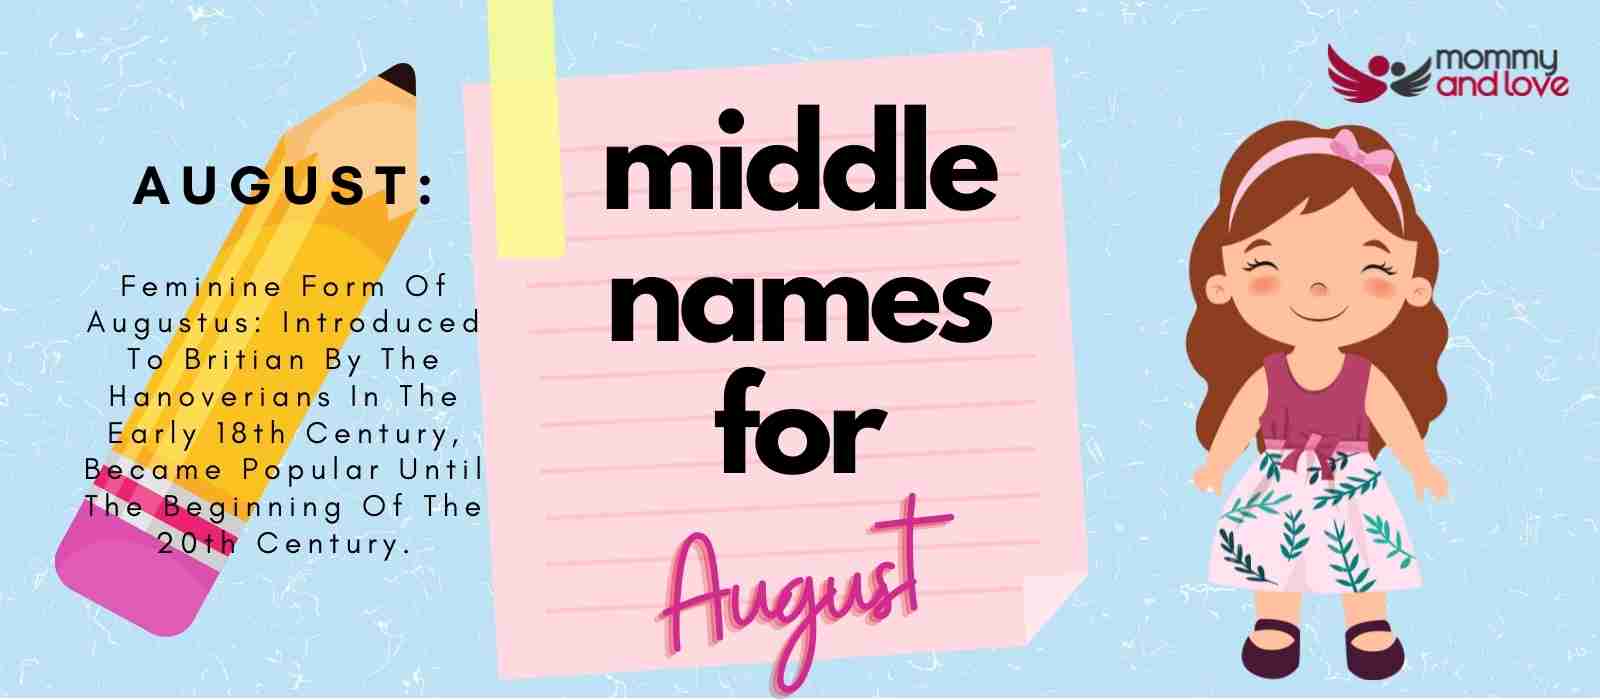 Middle Names for August